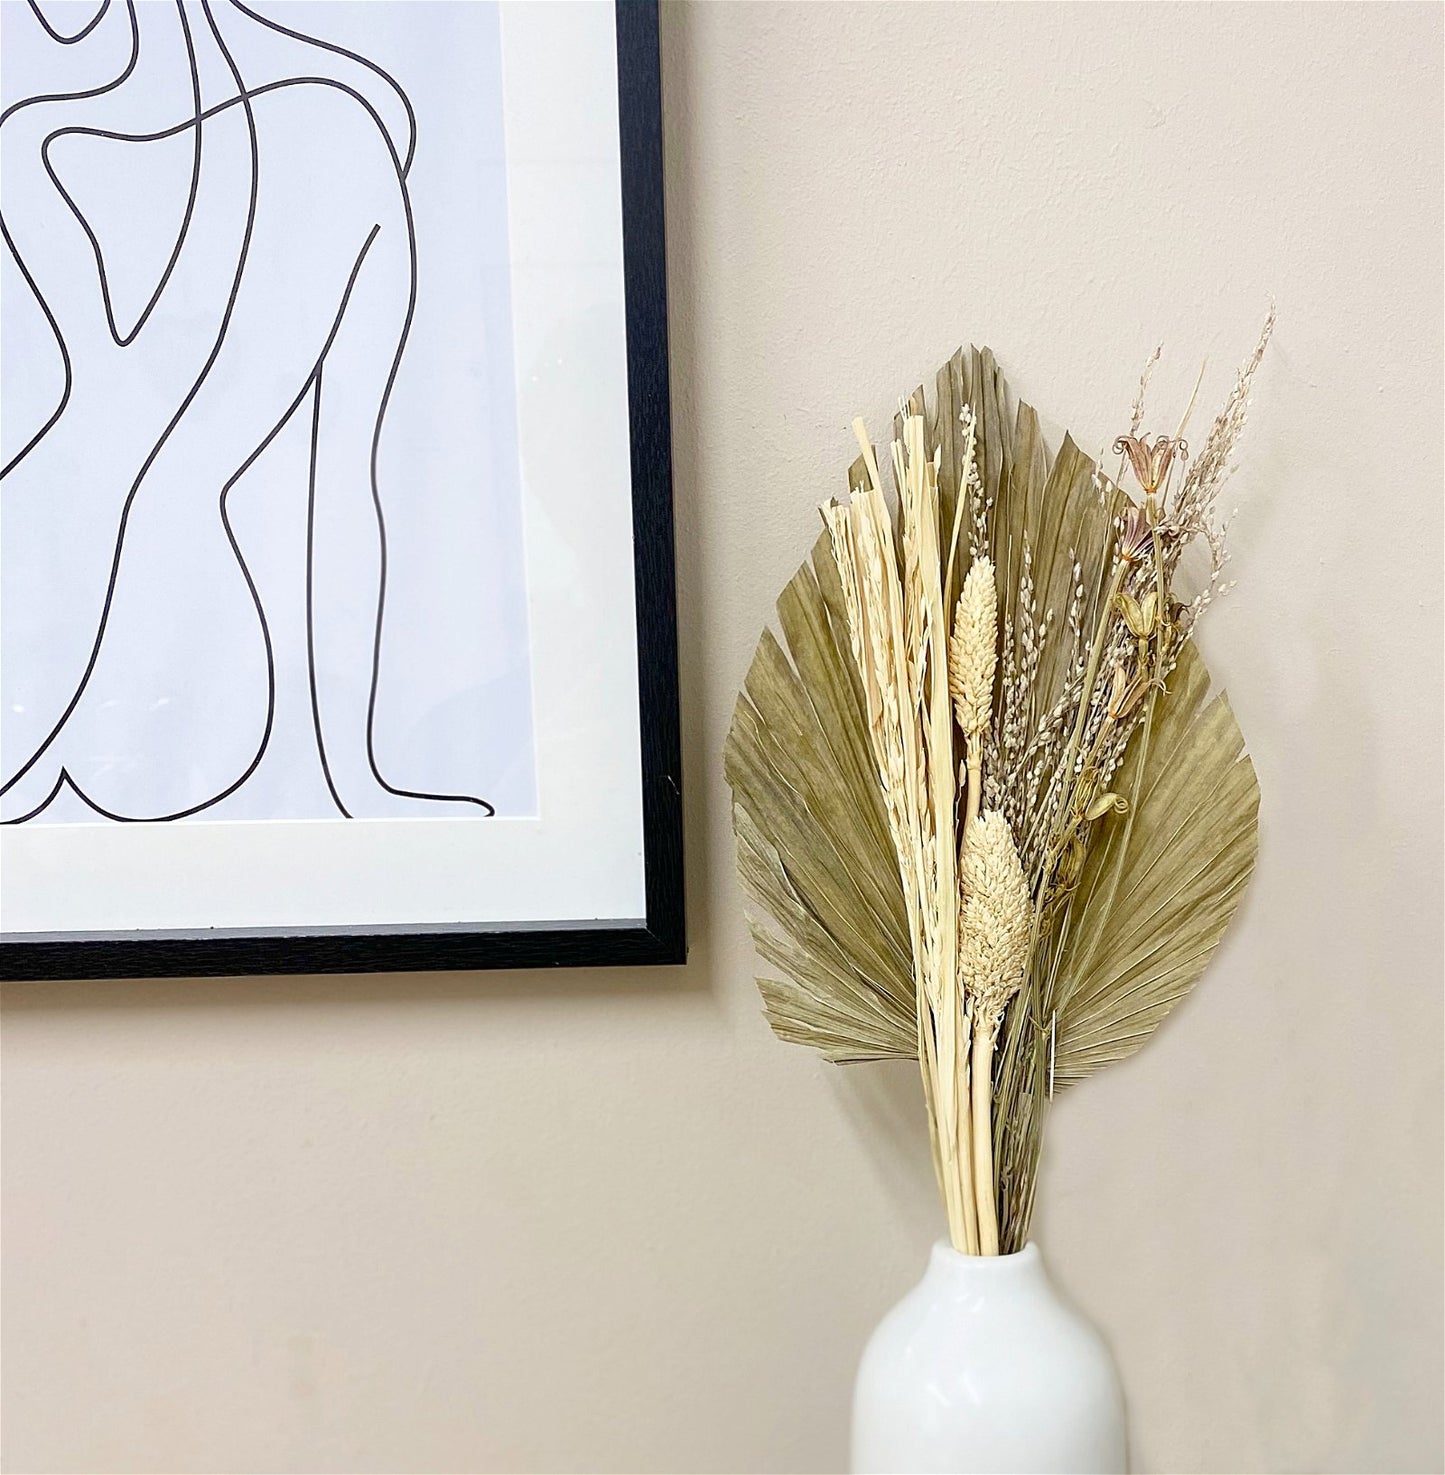 Set of Four Bouquets of Dried Grasses with Long Palm Spear